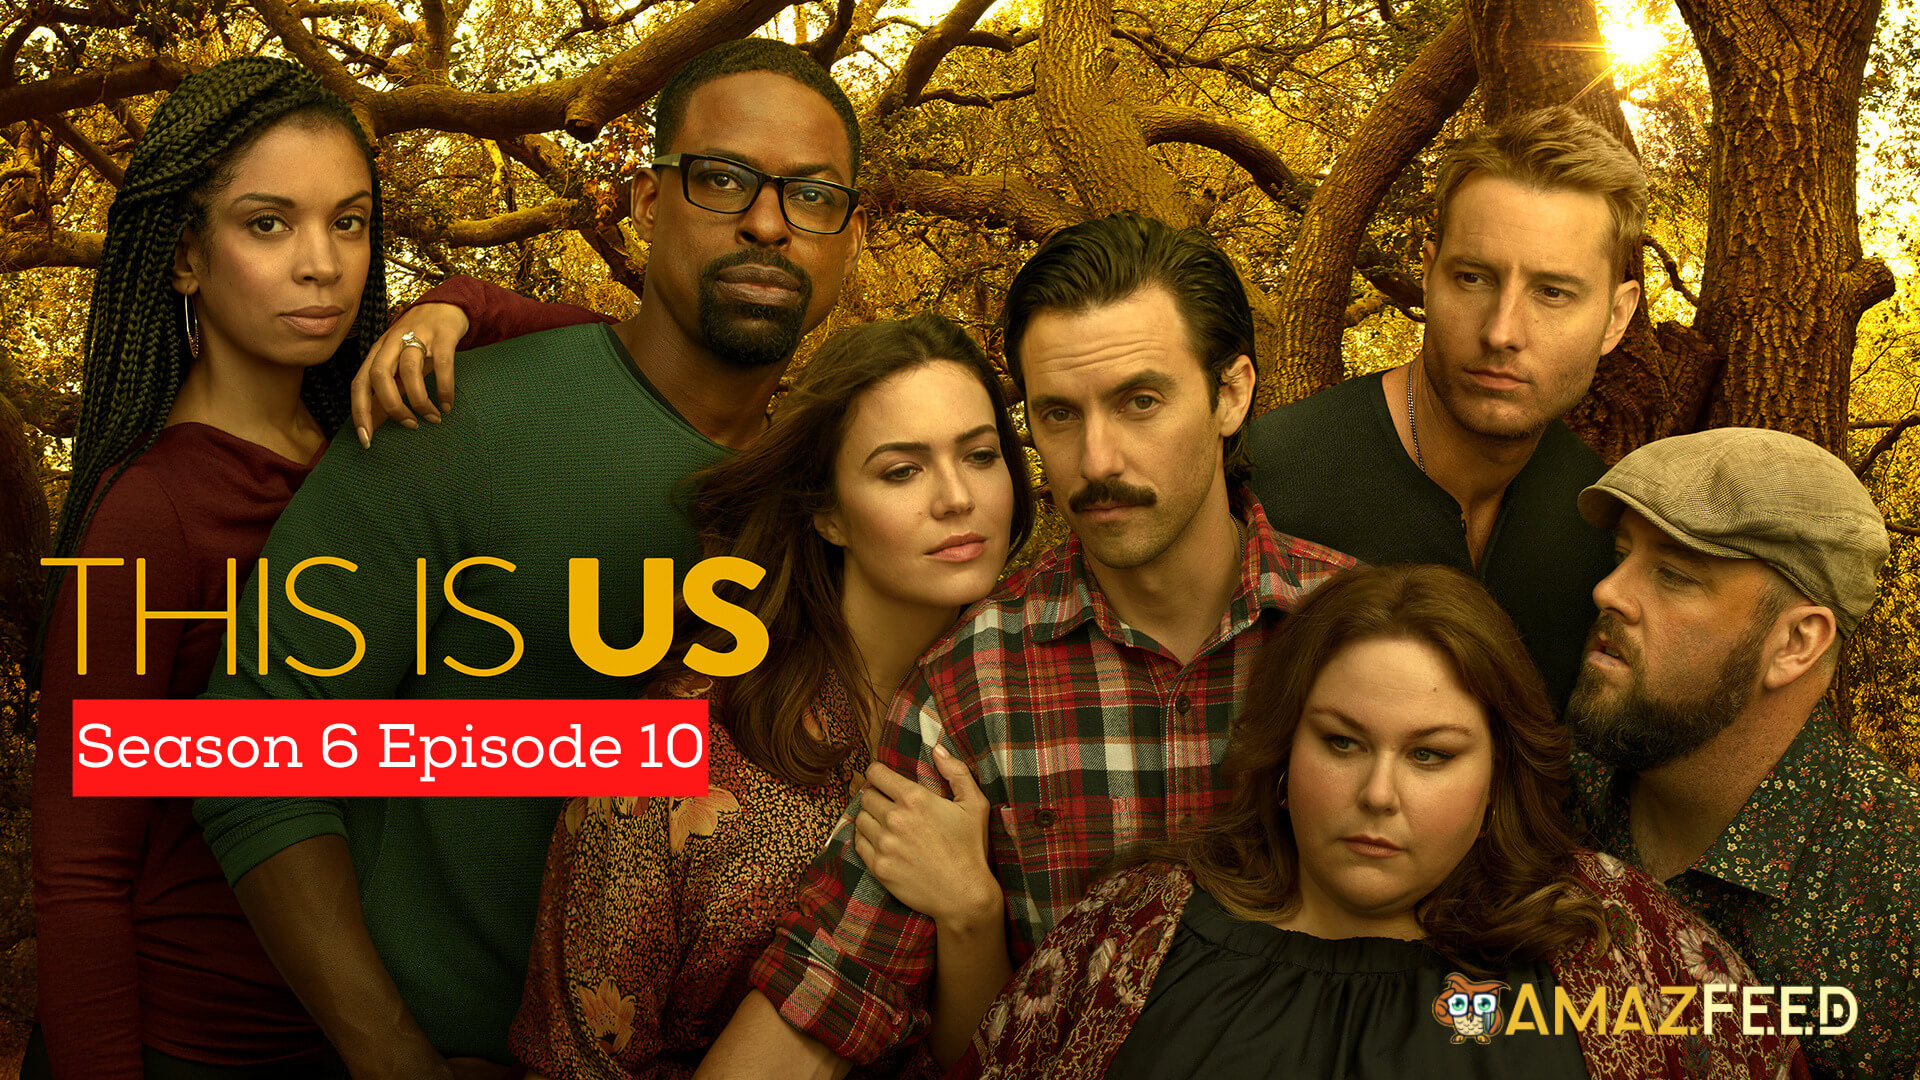 This Is Us Season 6 Episode 10 Release Date